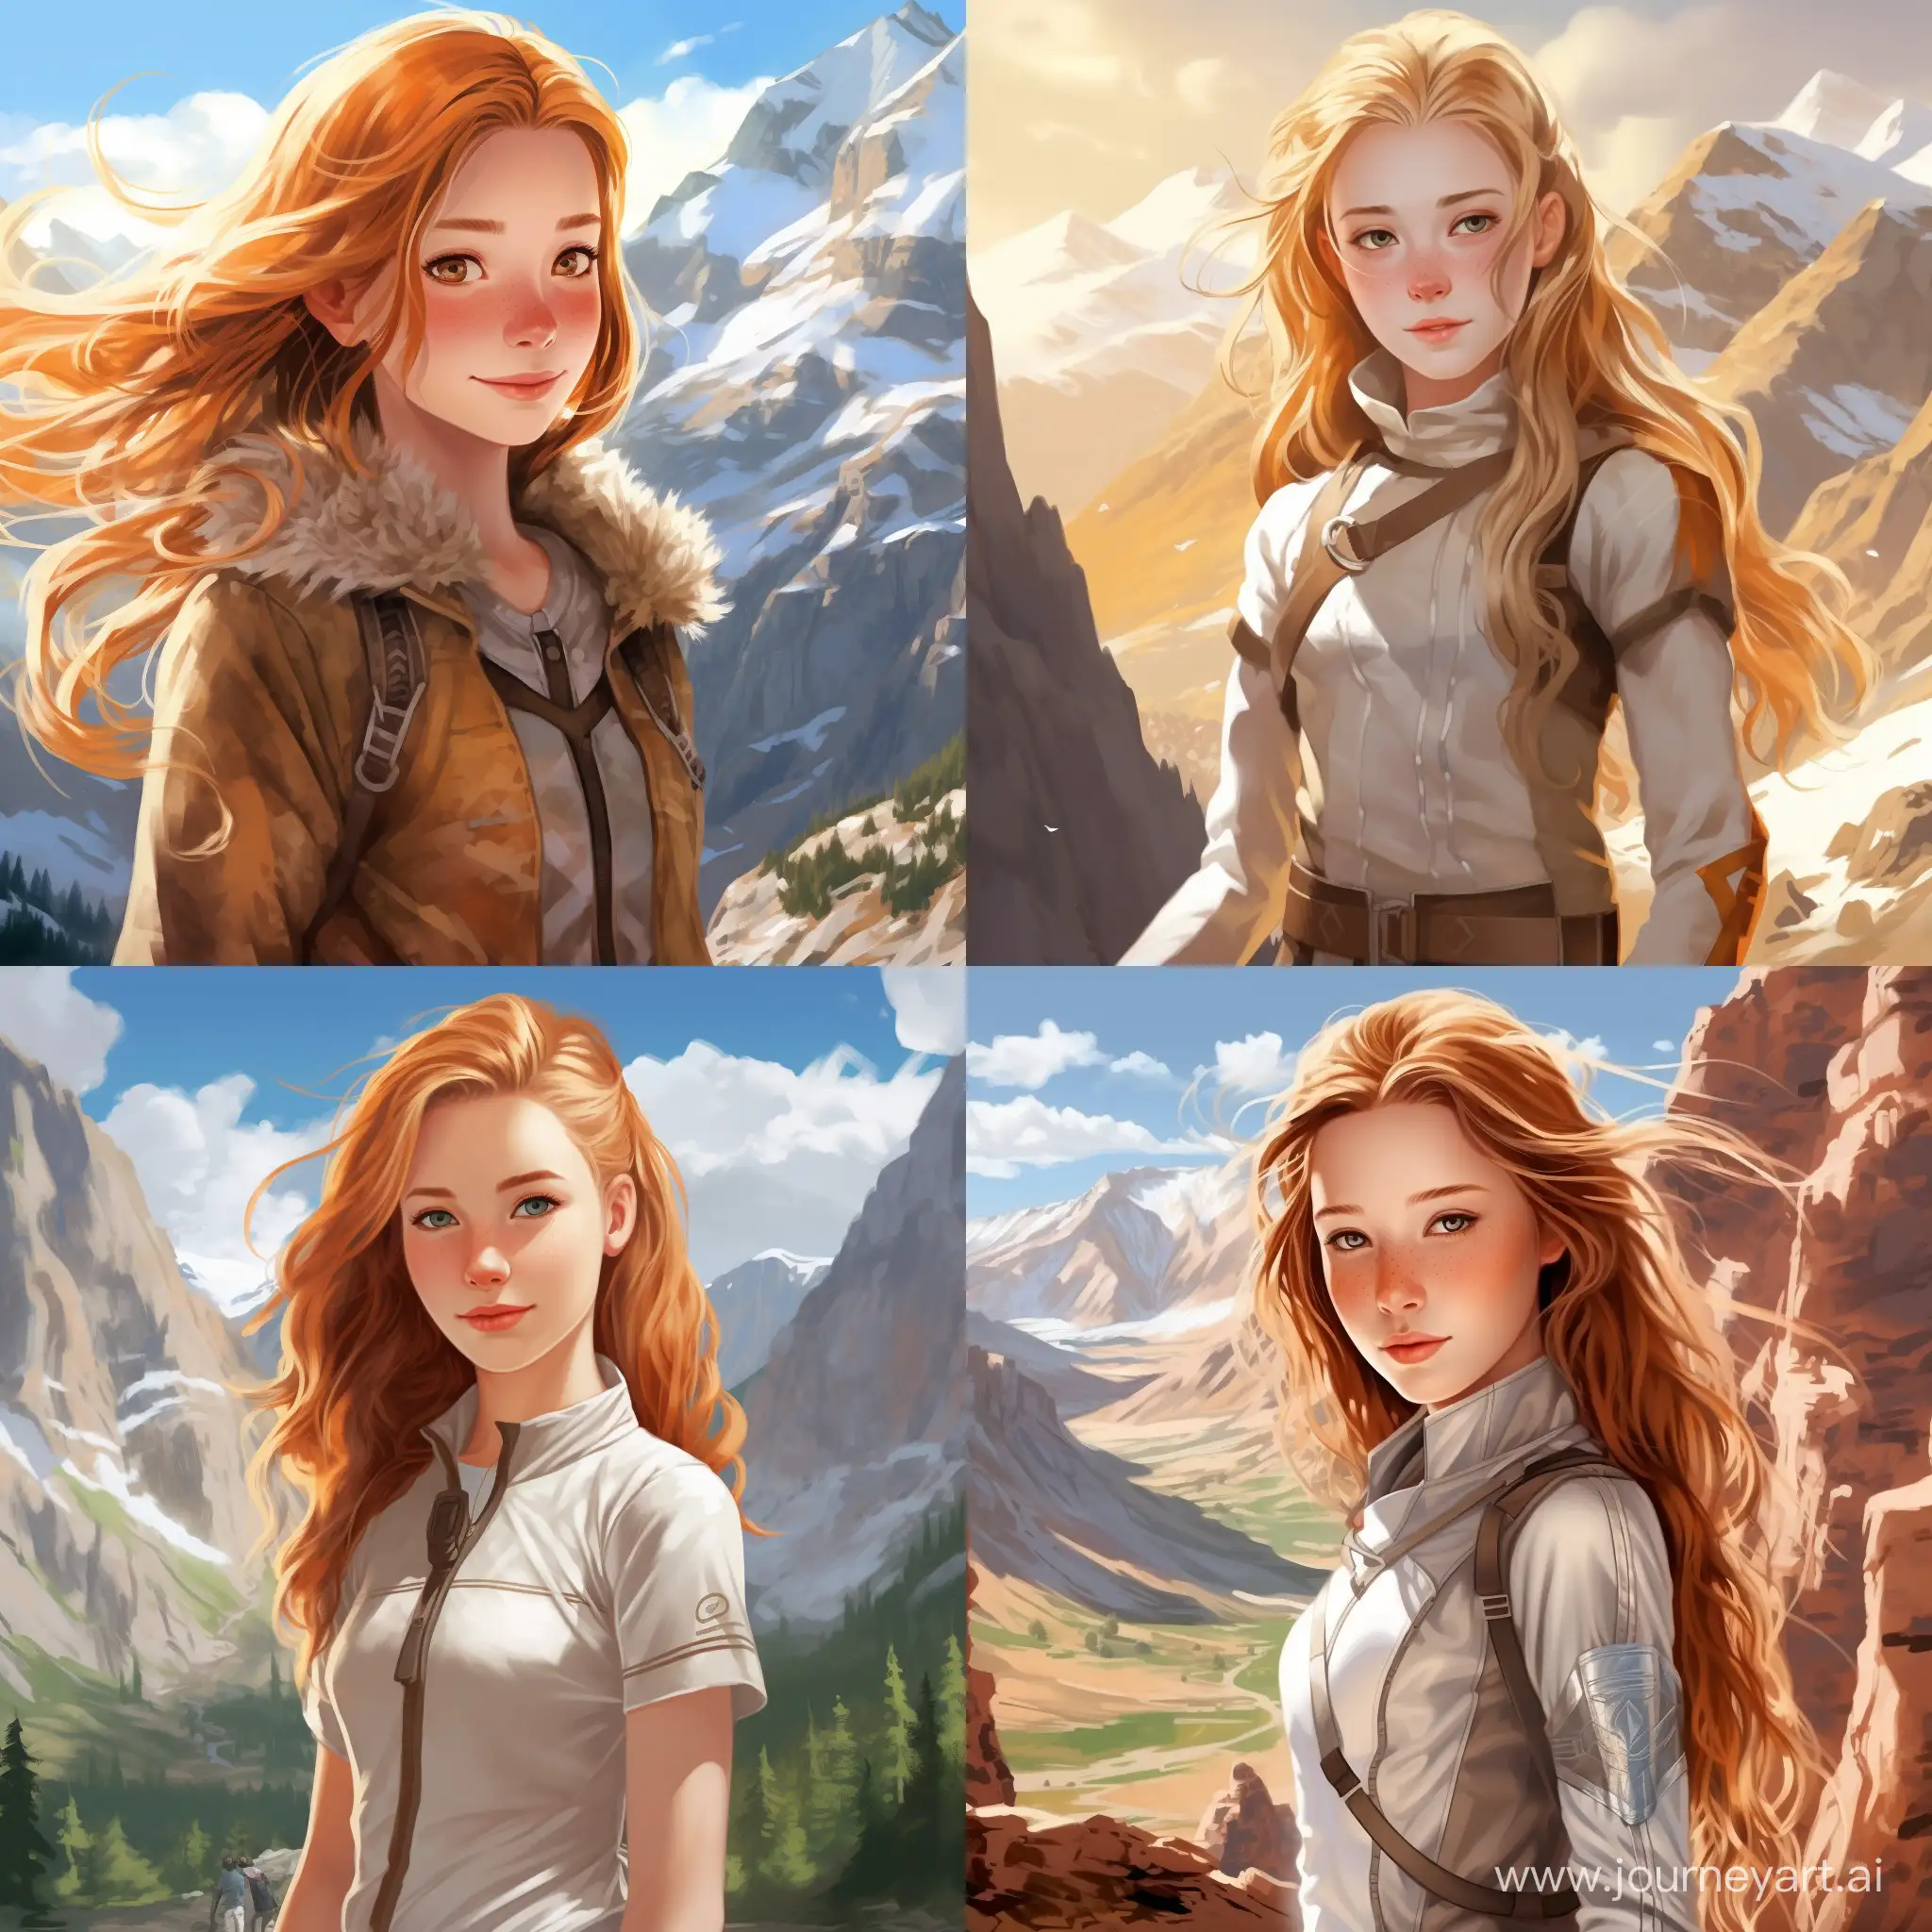 Beautiful girl, golden hair, gray-blue eyes, snow-white skin, teenager, 14 years old, avatar style legend of aang, journey in the mountains, high quality, high detail, cartoon art